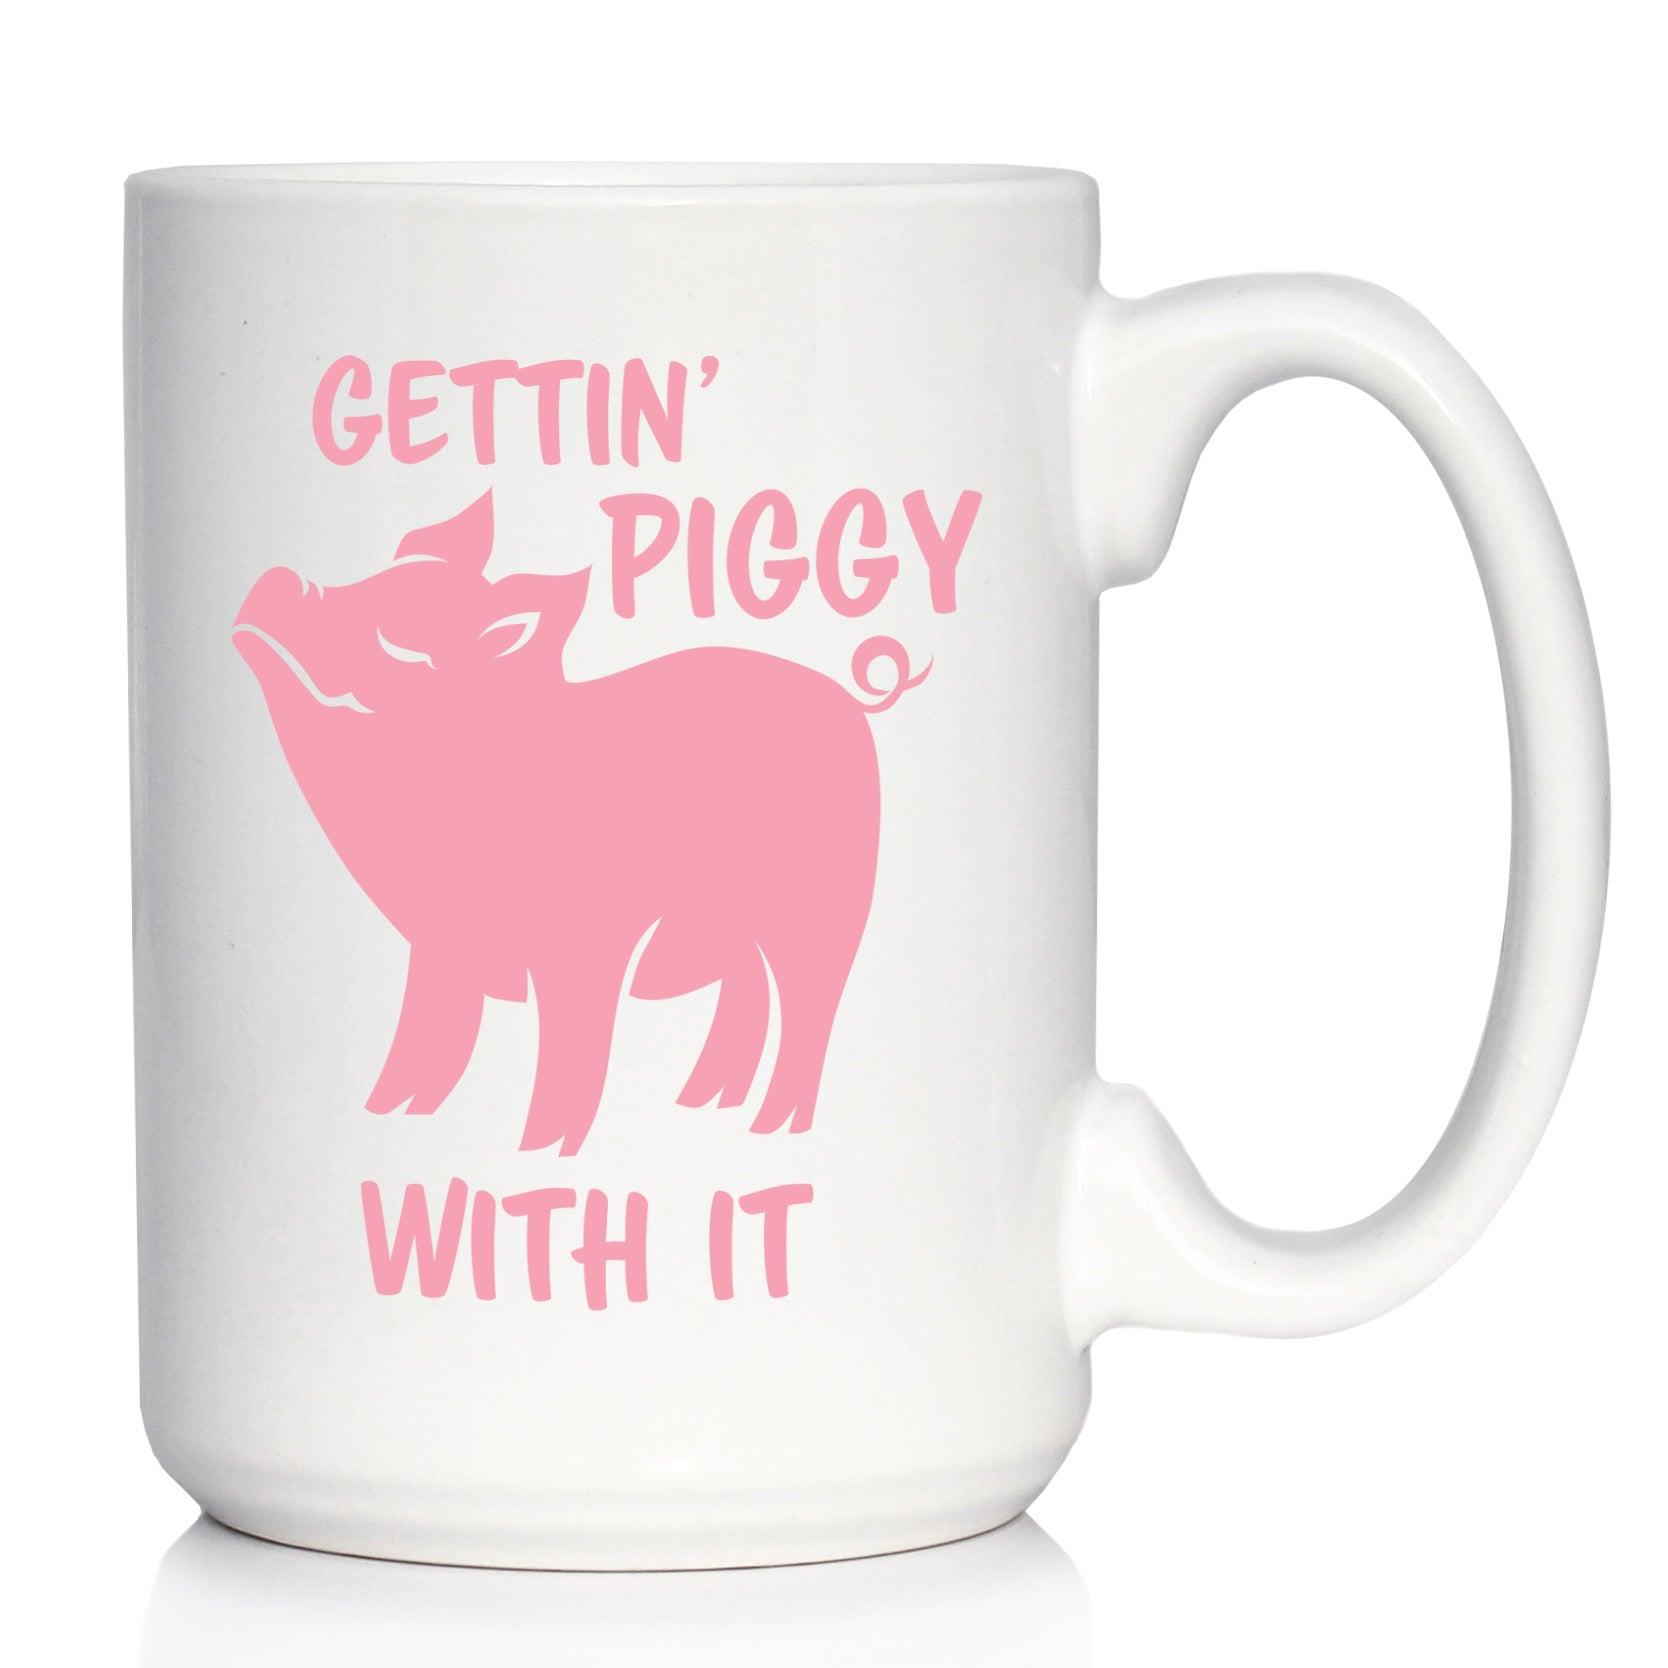 Gettin' Piggy With It - Cute Funny Pig Coffee Mug - Pig Gifts and Decor for Lovers of Piggies